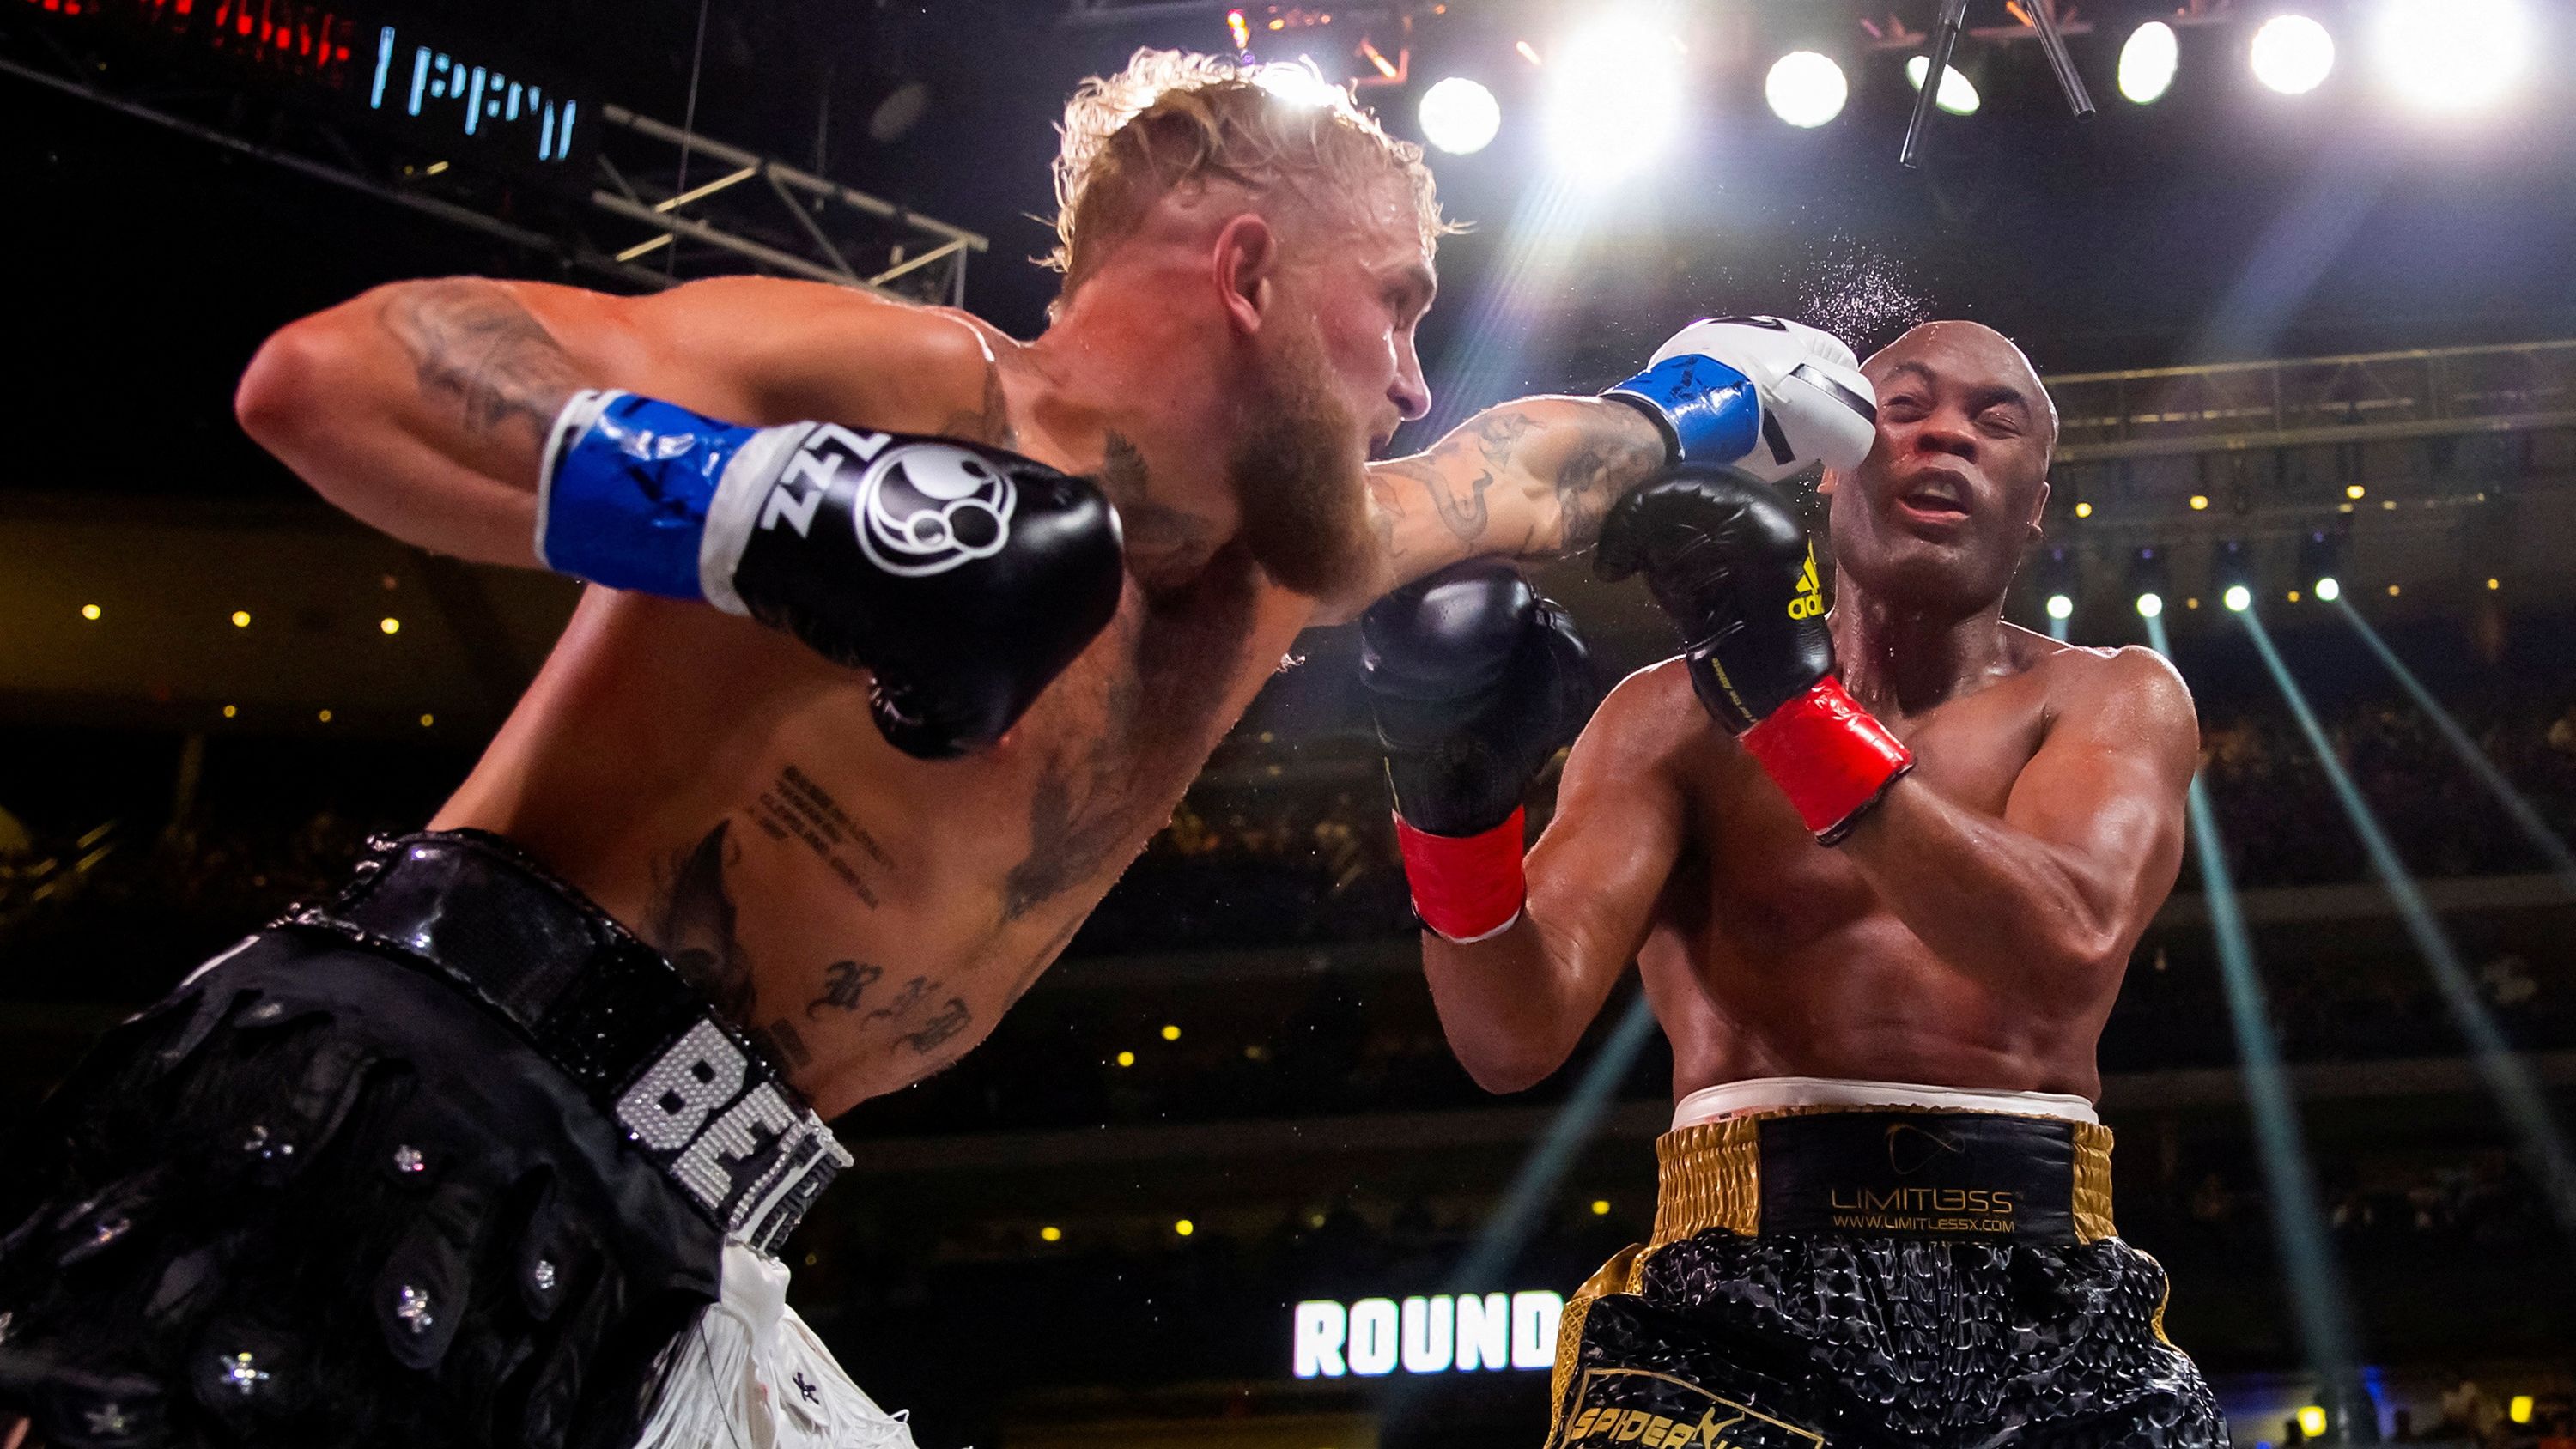 Jake Paul lands a punch on Anderson Silva during a boxing match in Glendale, Arizona, on Saturday, October 29. Paul beat Silva by unanimous decision.